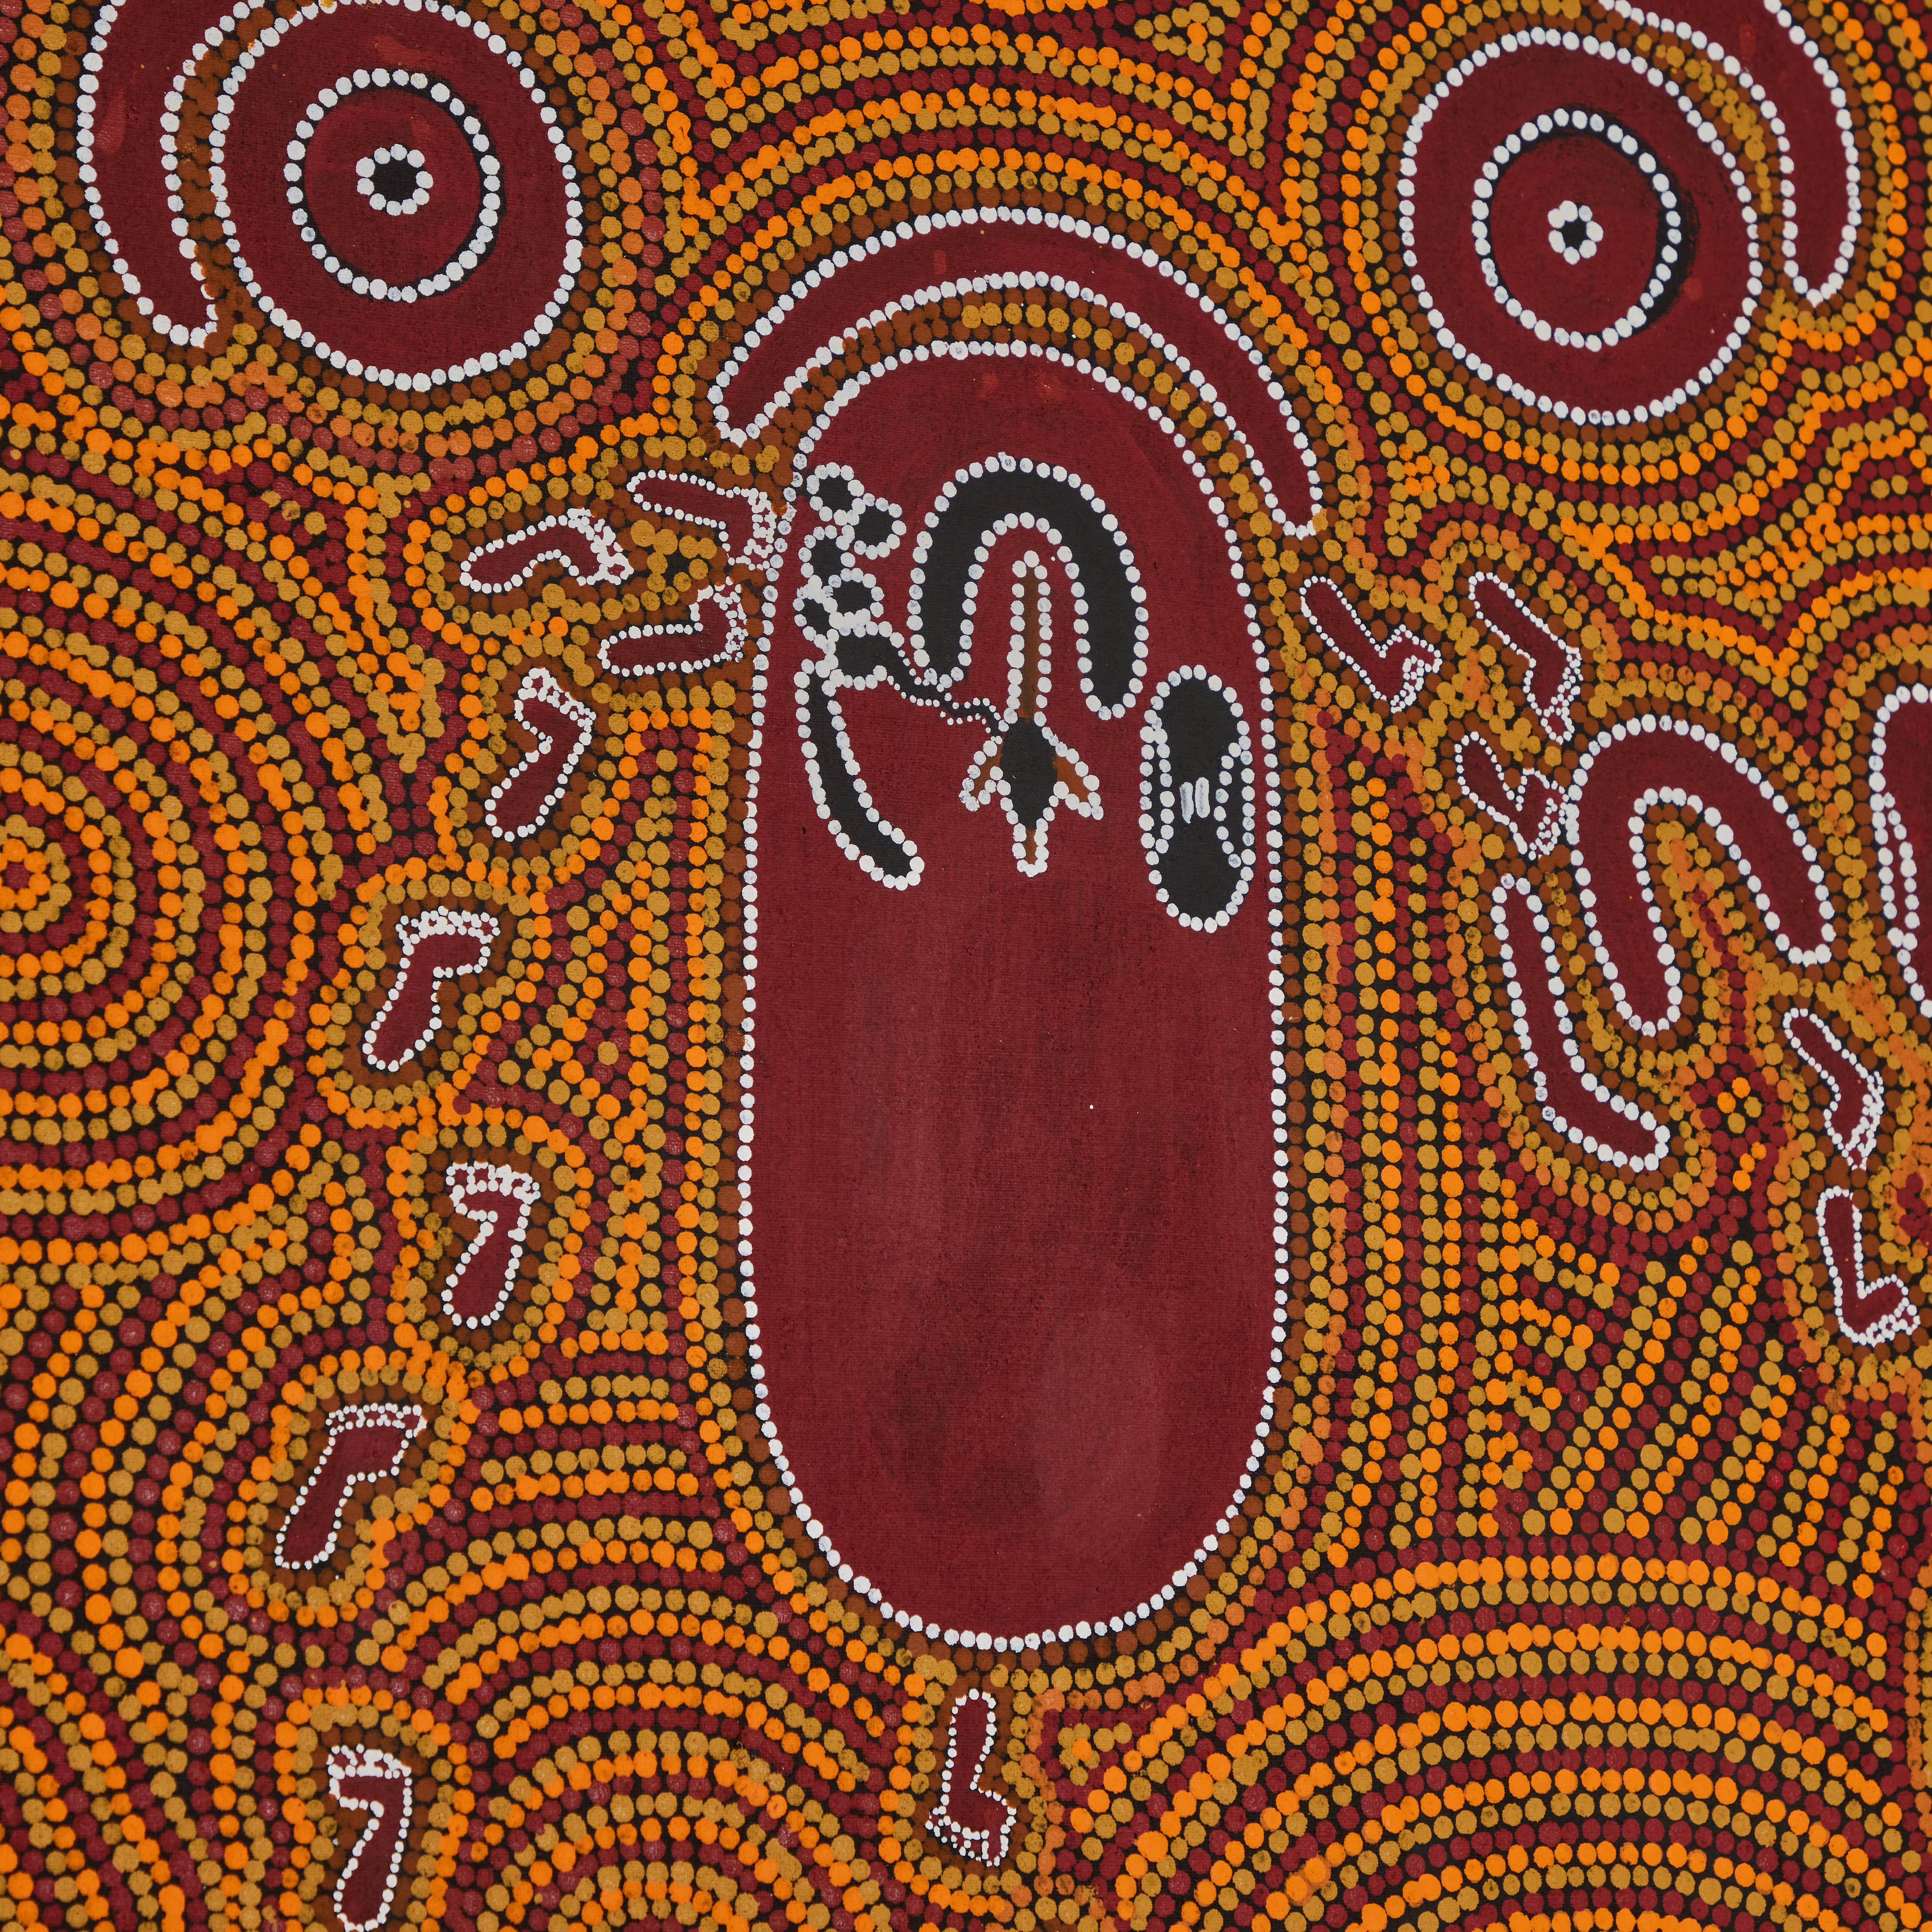 Hand-Painted Aboriginal Jukurrpa by Andrea and Kathleen Martin Nungarrayi For Sale